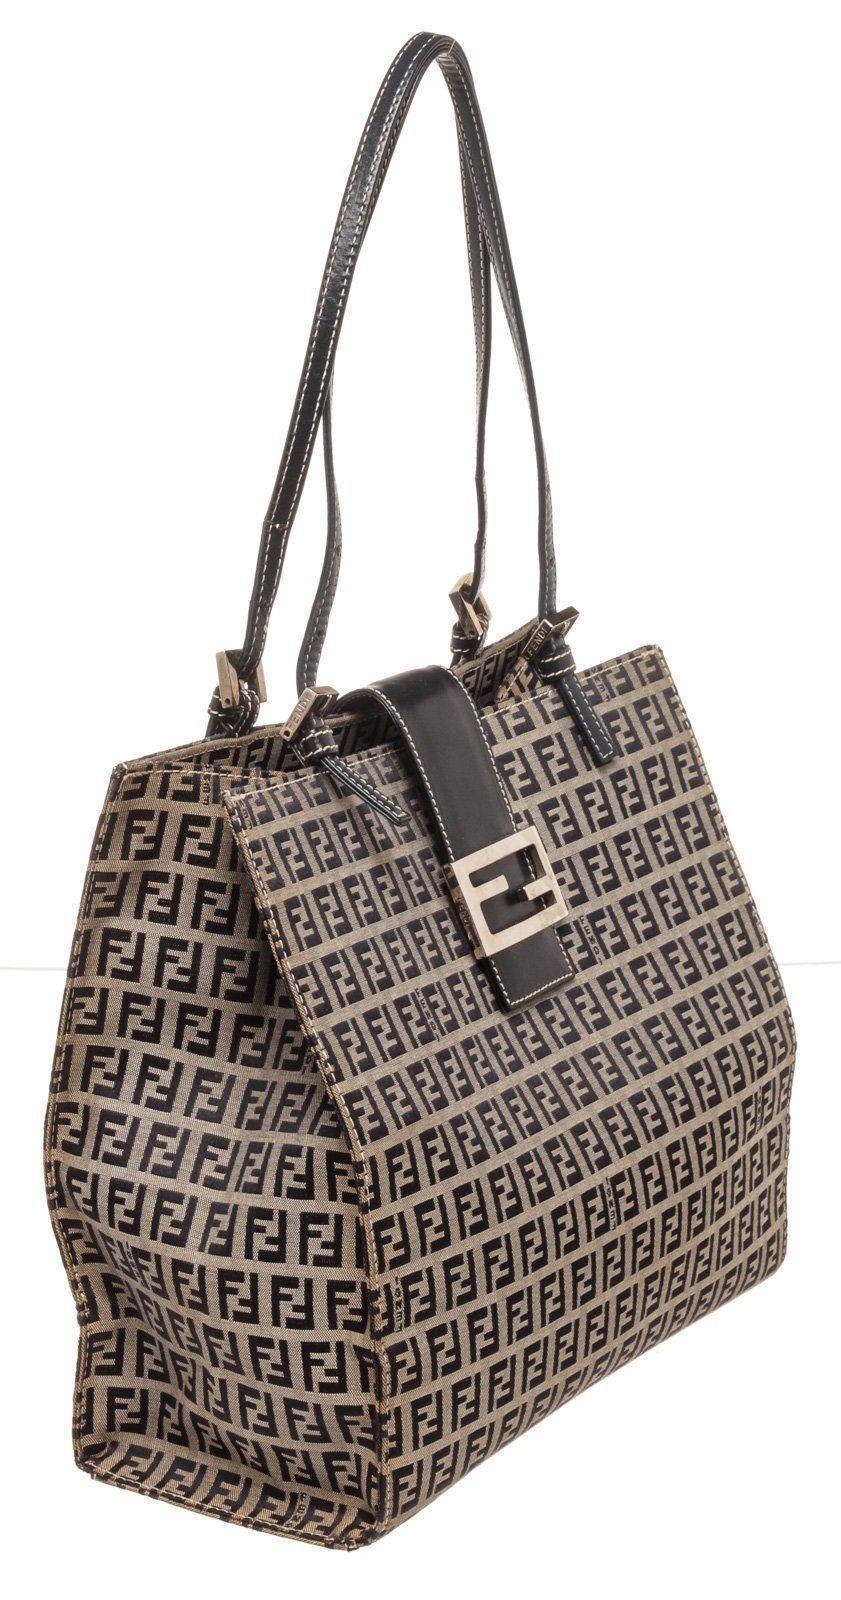 Fendi Tan Canvas Leather Zucca Tote Bag with dark brown leather trim, brown canvas lining, three interior compartments; center with zip top.